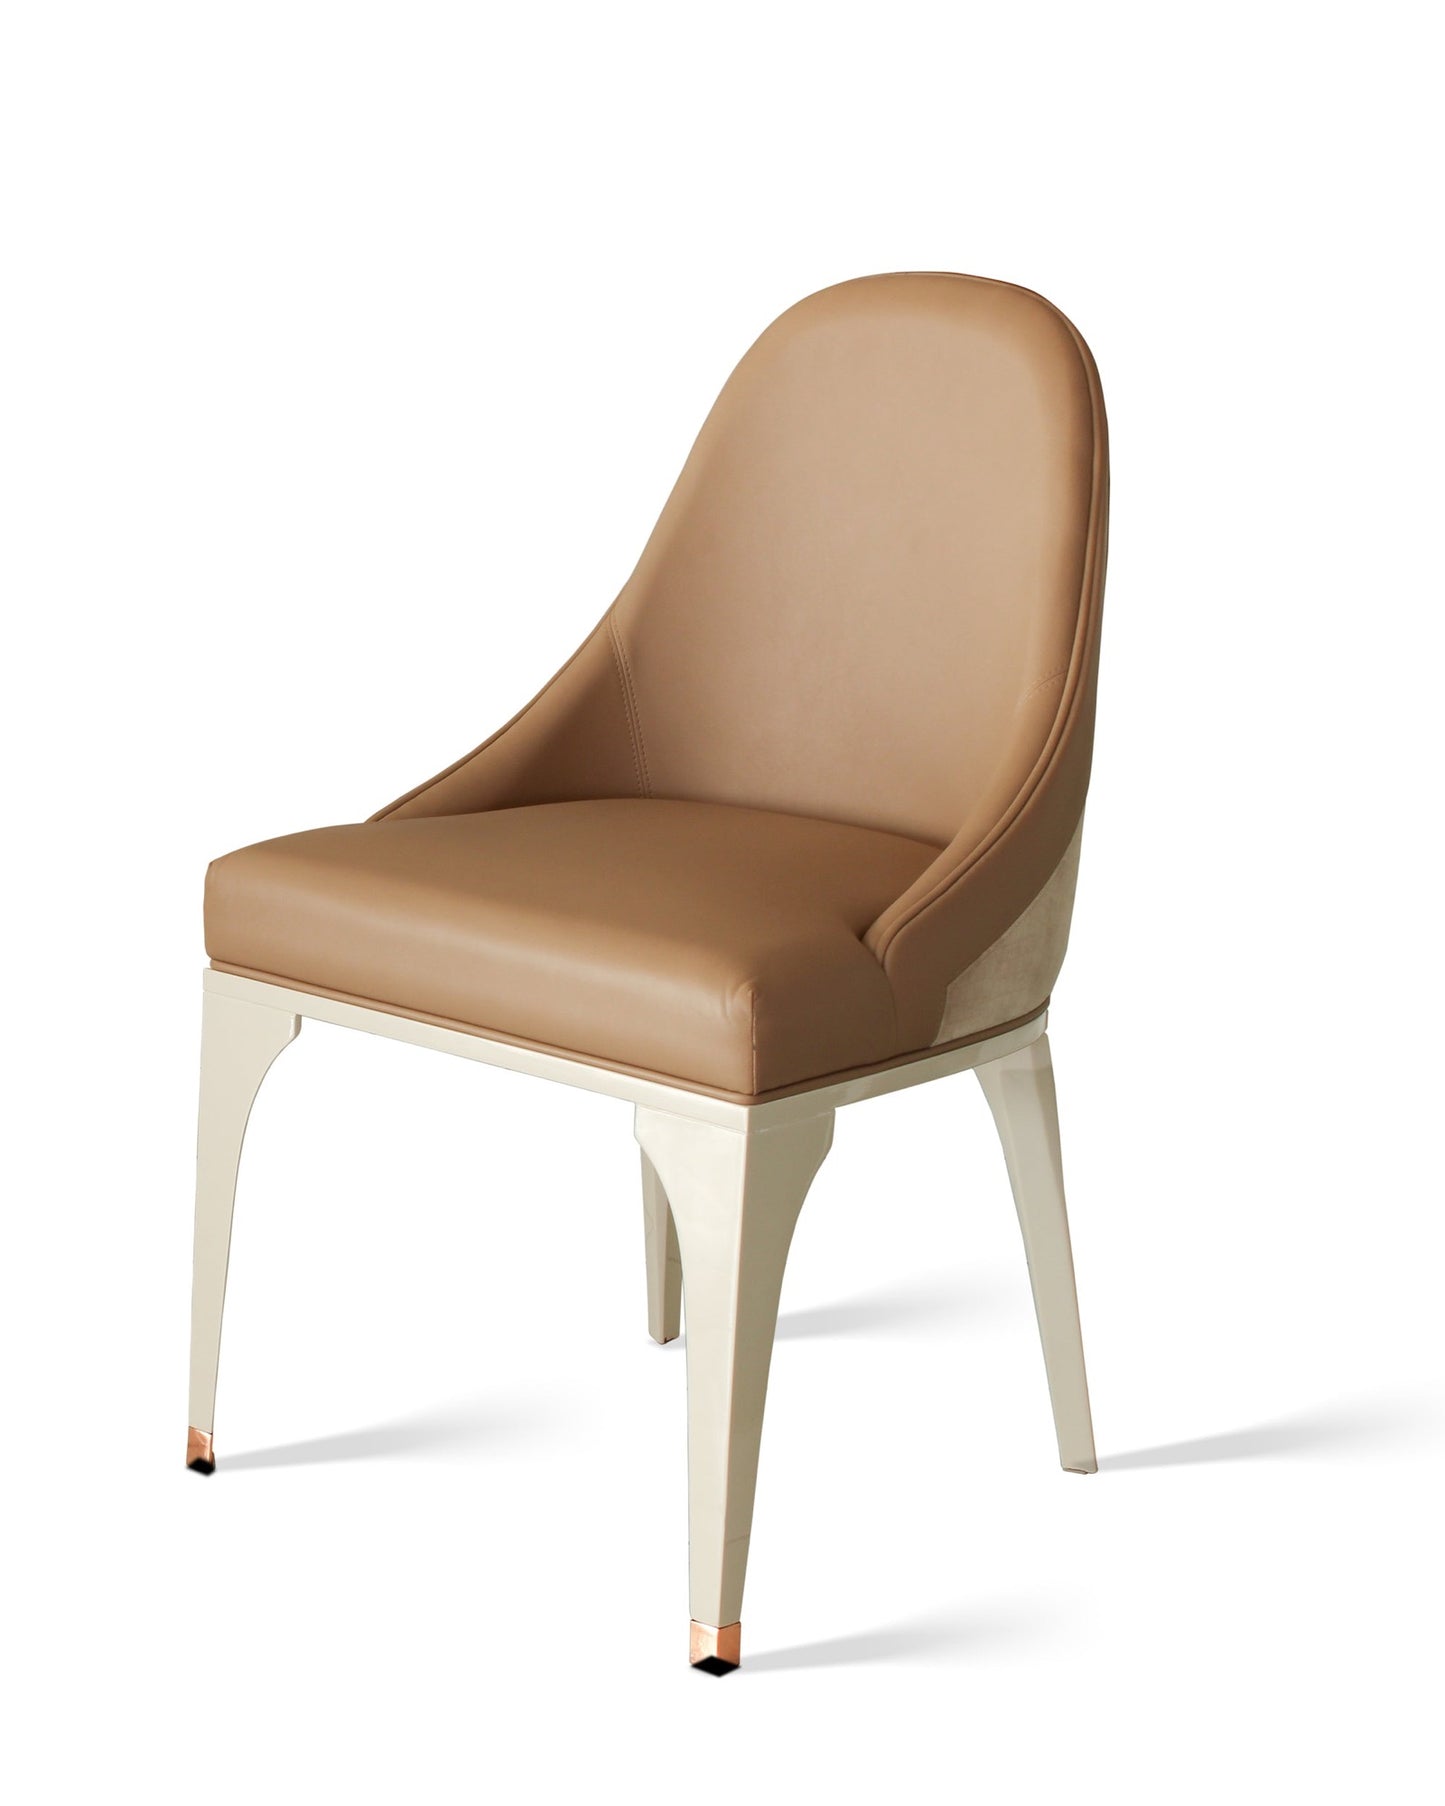 leather and fabric dining chair with gloss legs